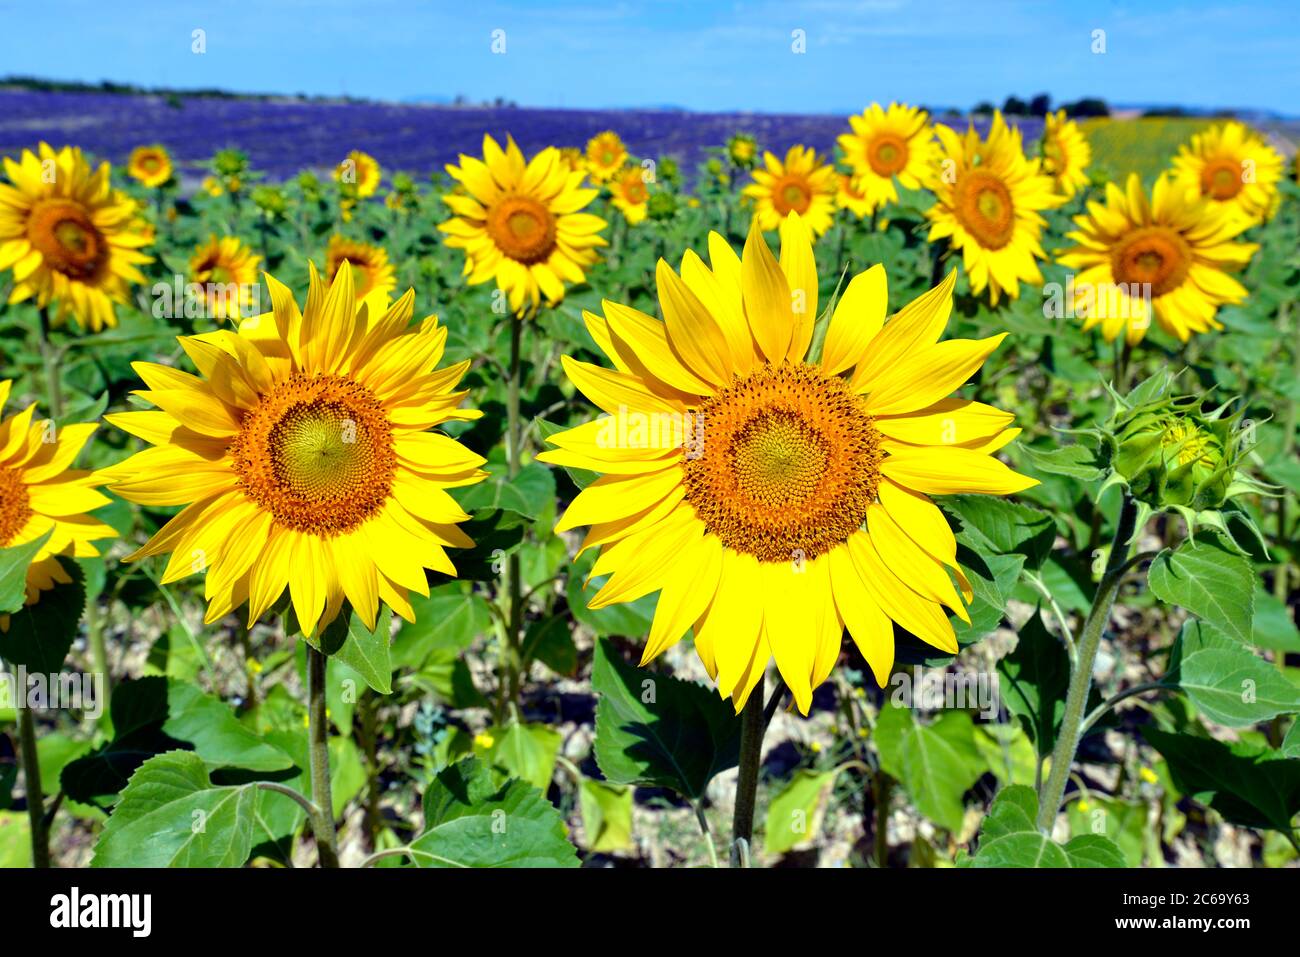 Closeup sunflowers (Helianthus annuus) on the famous Valensole plateau, a commune in the Alpes-de-Haute-Provence department in southeastern France Stock Photo